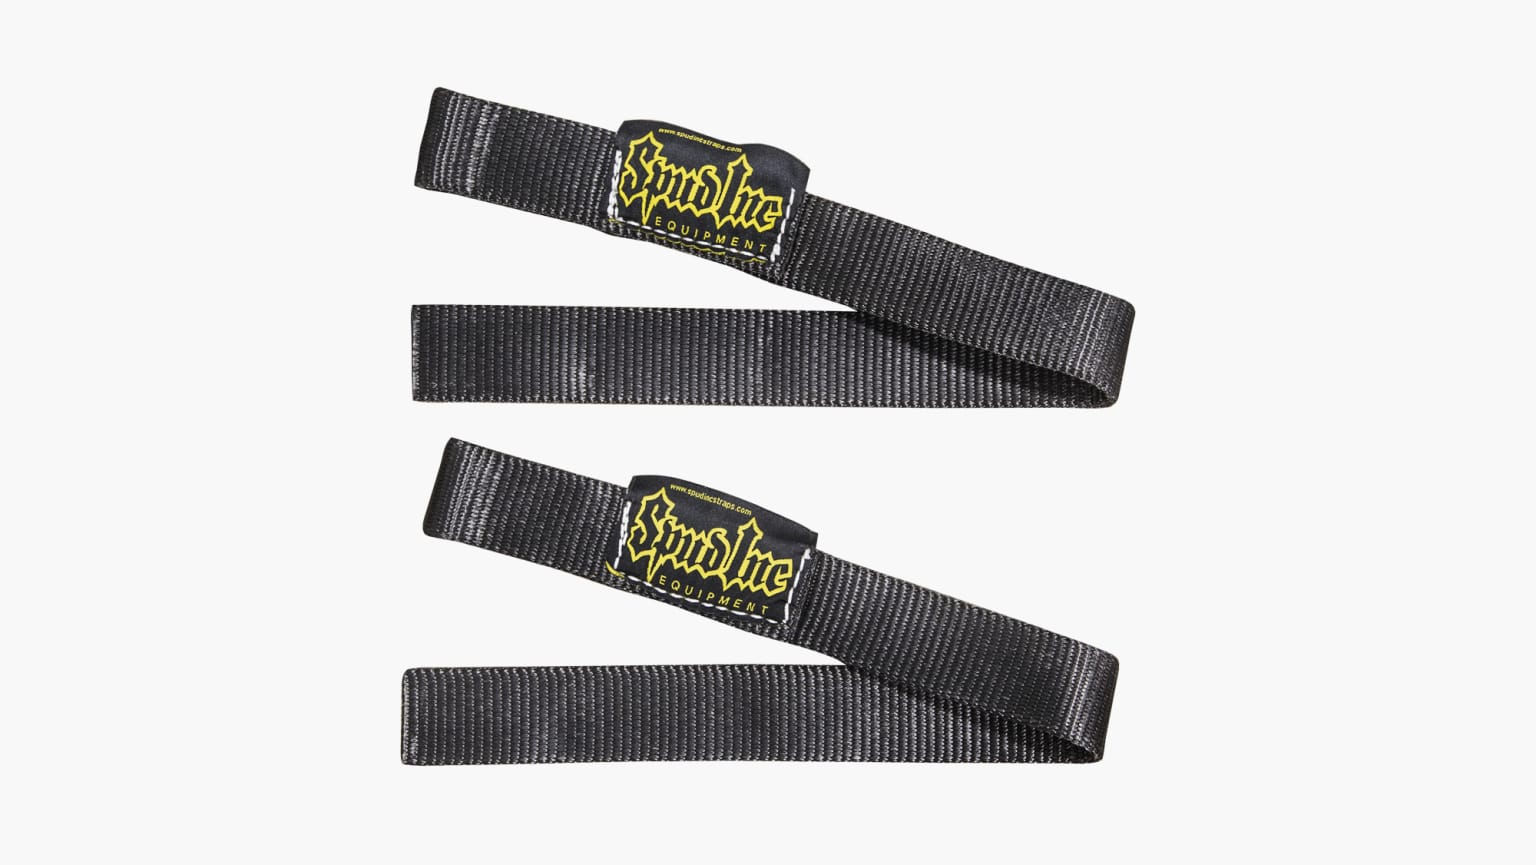 Classic lifting straps for Olympic weightlifters - six-pack-www